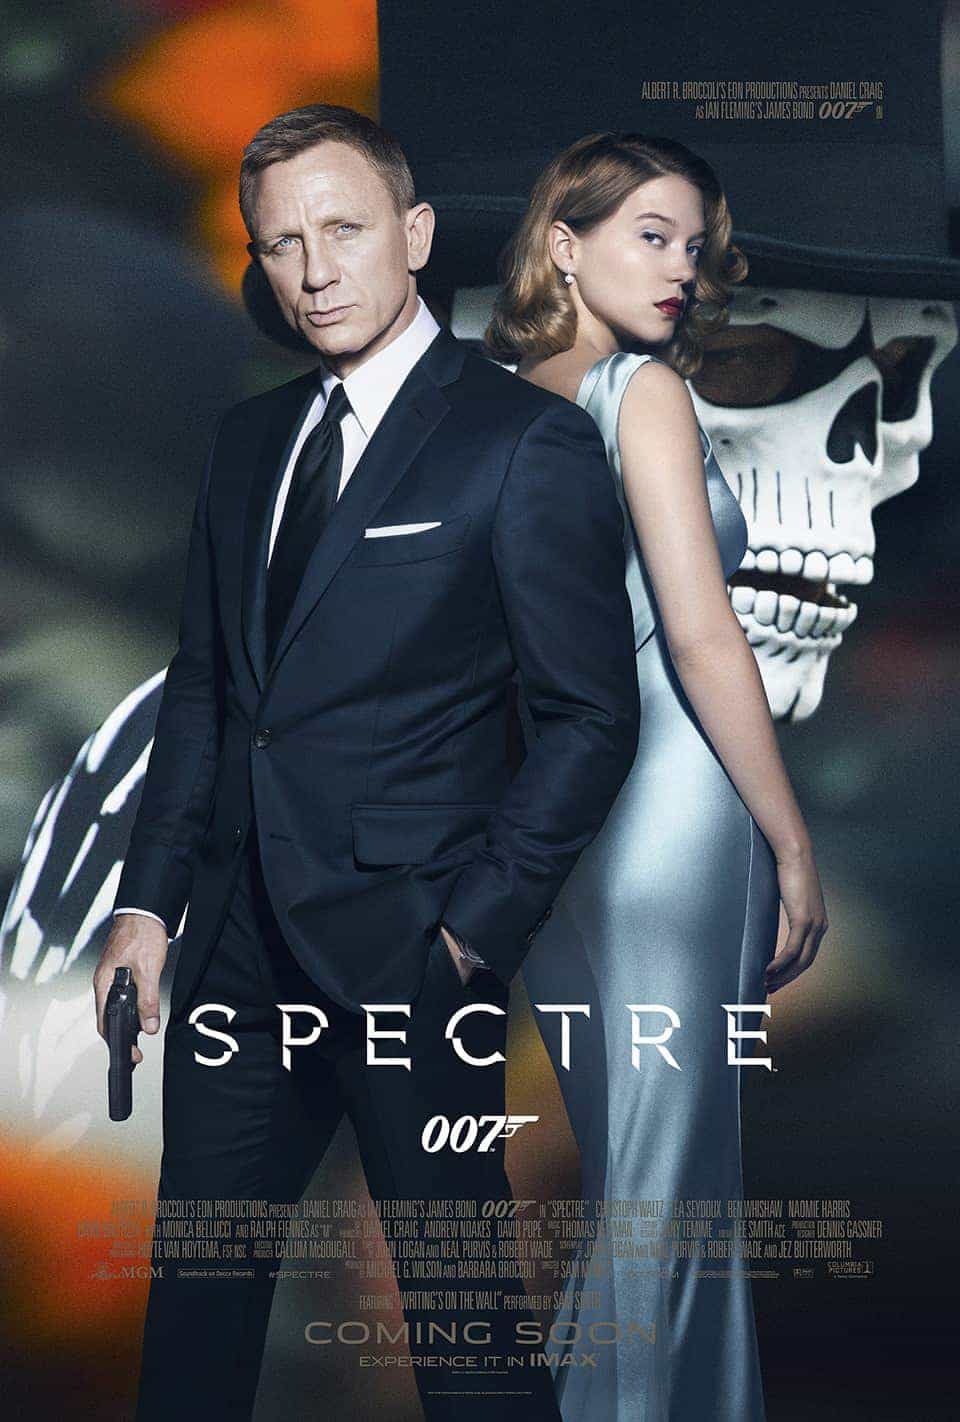 Spectre is the title of the new Bond film.